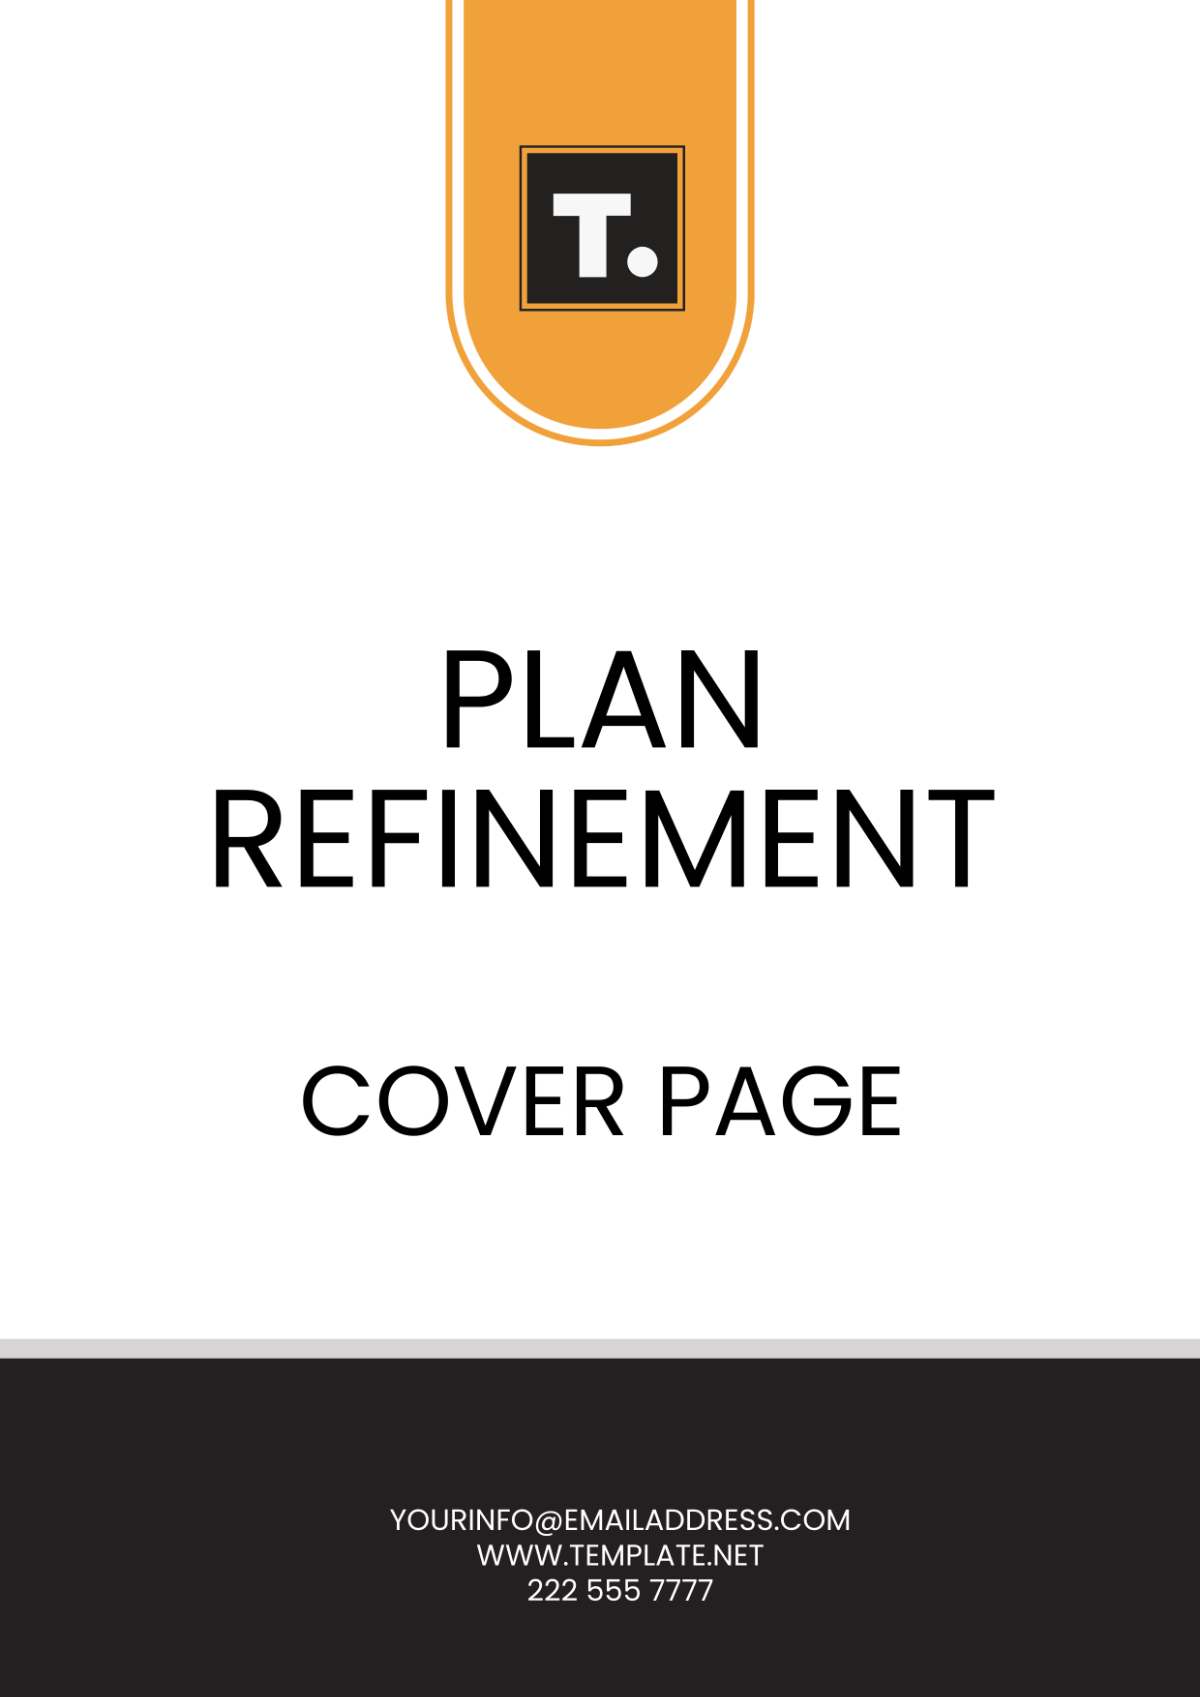 Free Plan Refinement Cover Page Template